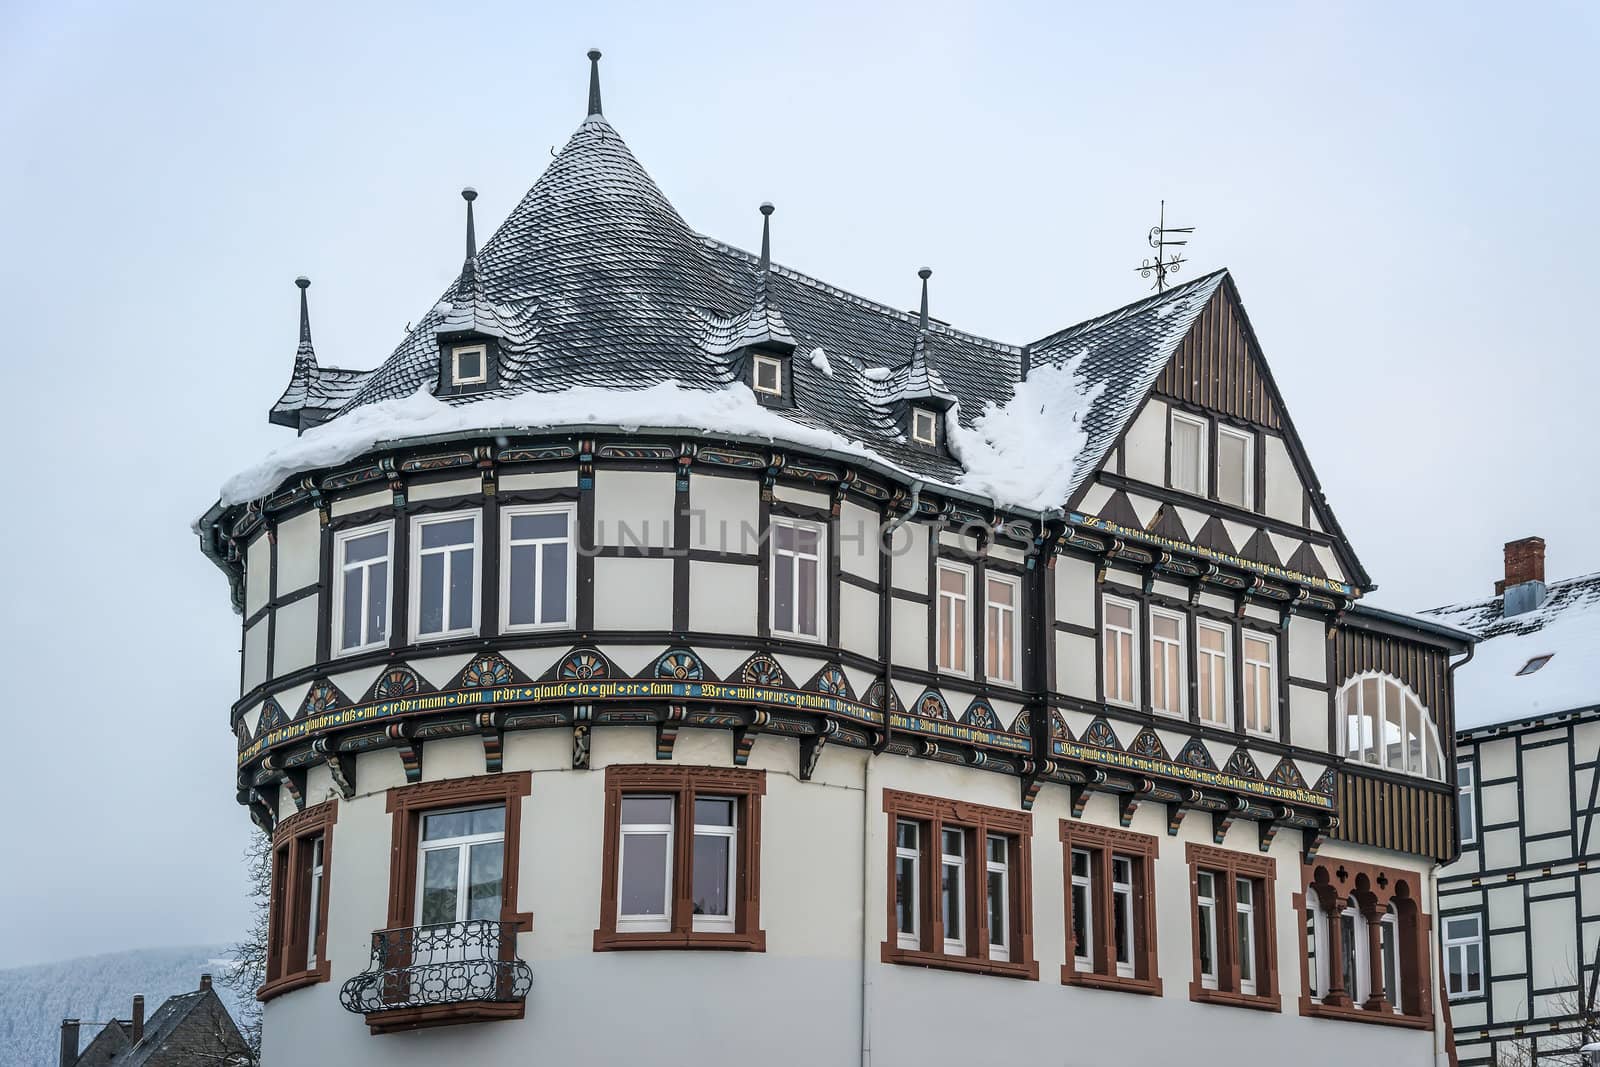 Detail view of a half-timbered house with snowfall in Goslar, Germany